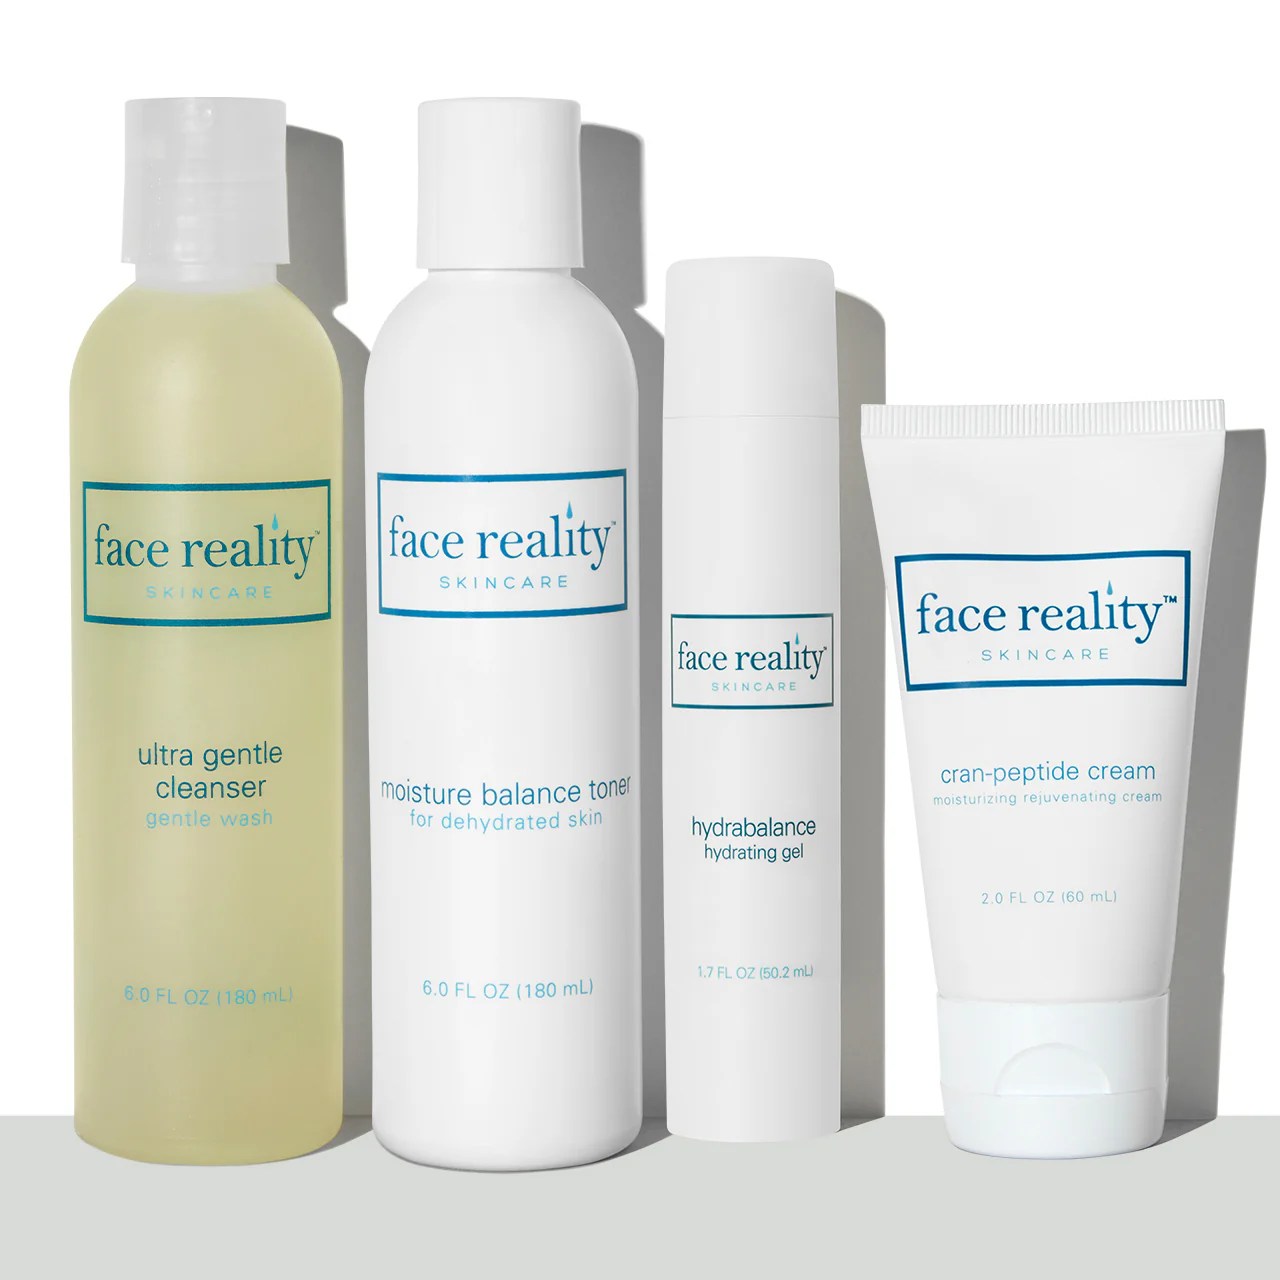 Discover Youthful Radiance with Face Reality Hydrabalance Hydrating GelQ